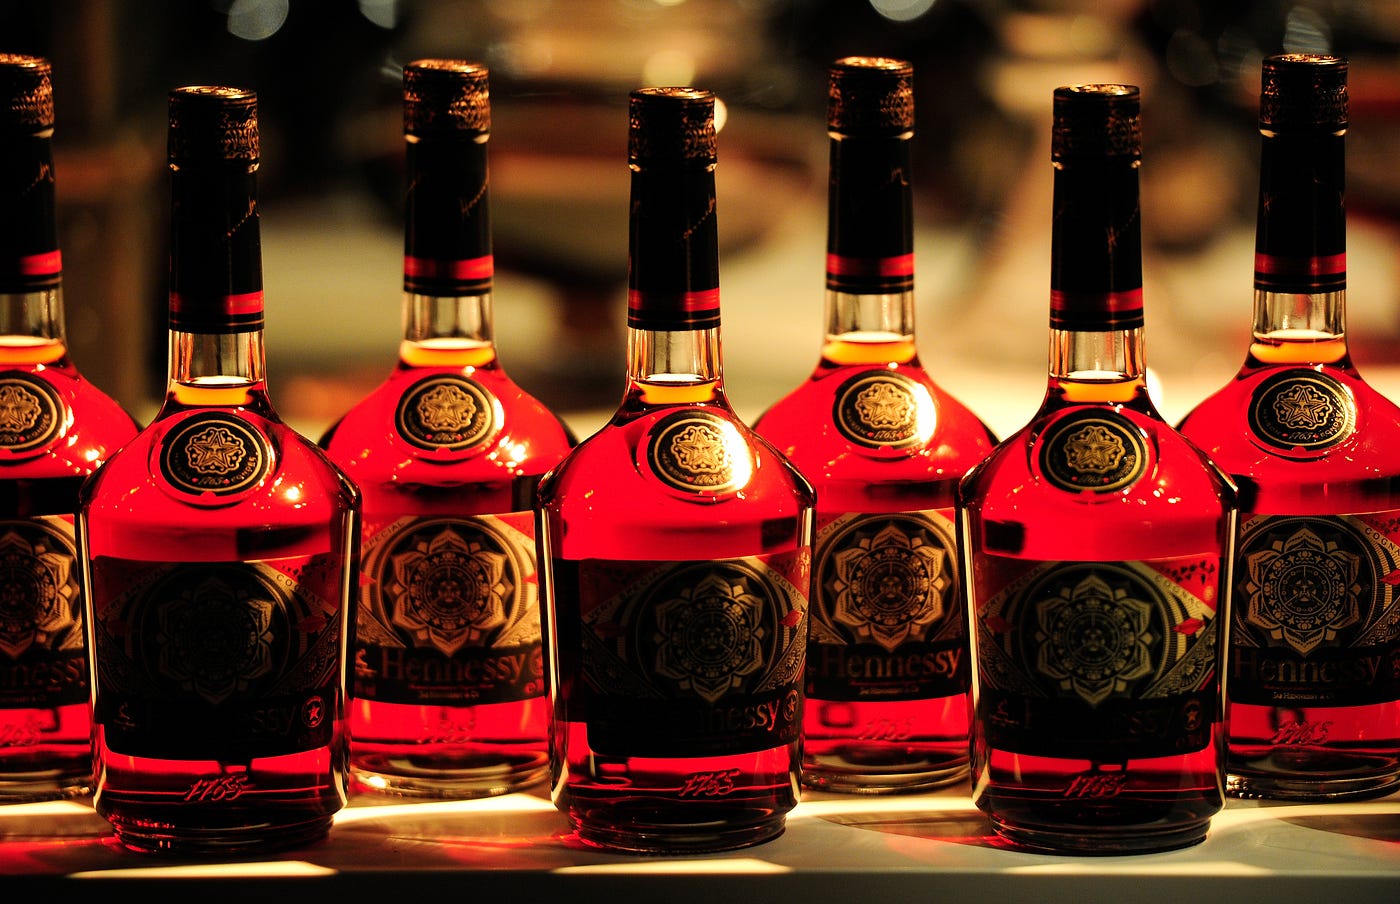 How Hennessy Exploited Black Culture for Profit